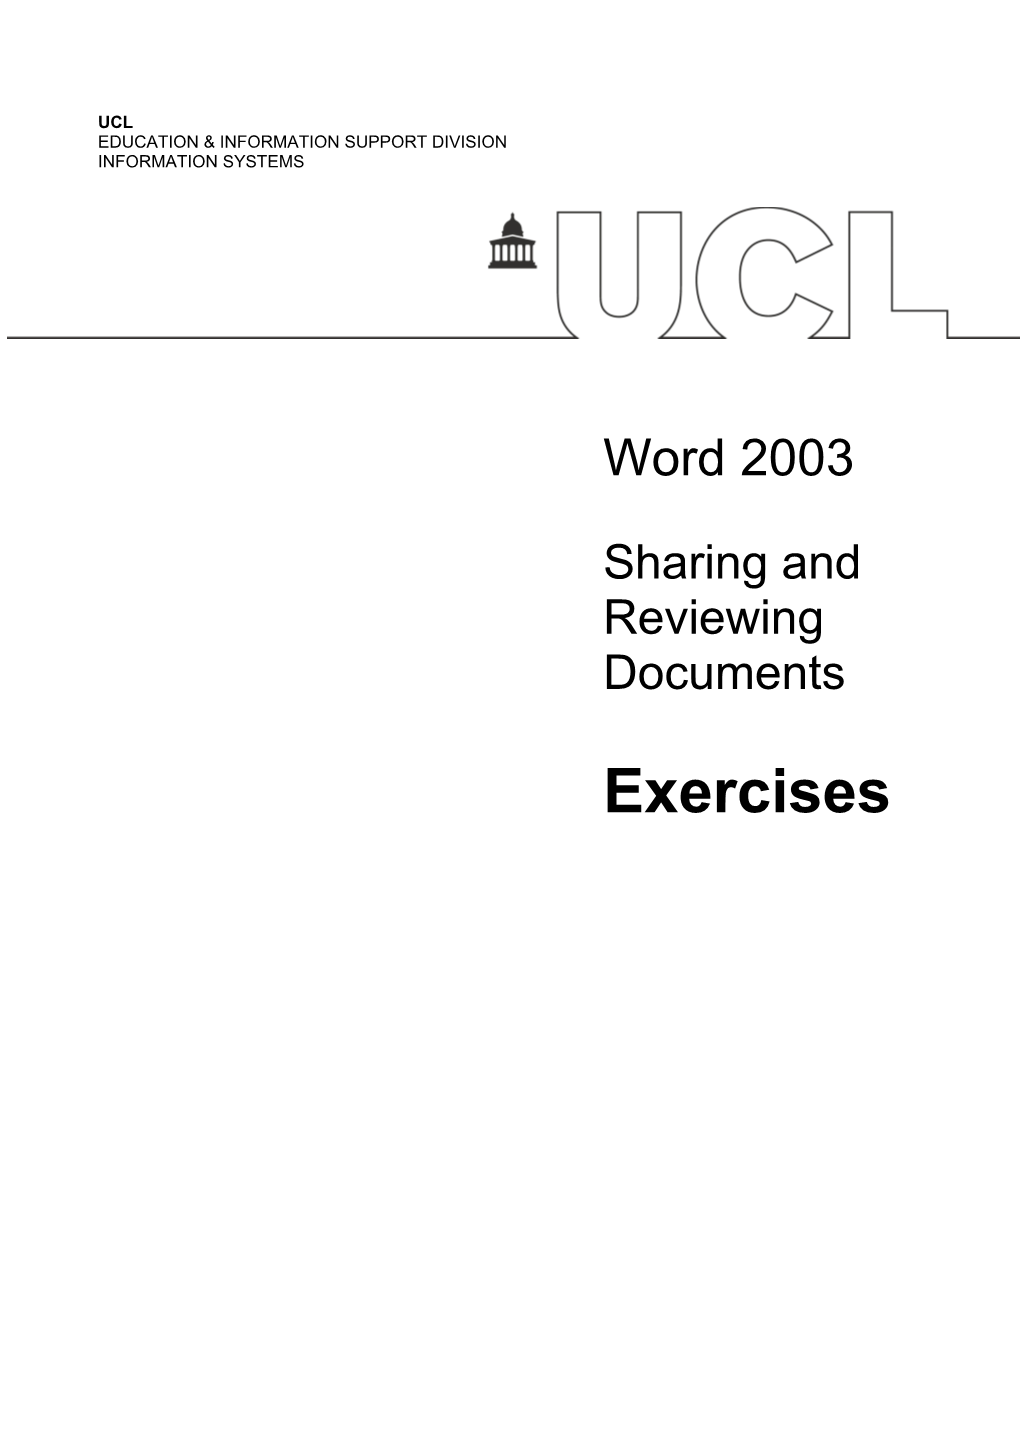 Word Templates Forms and Fields - Exercises